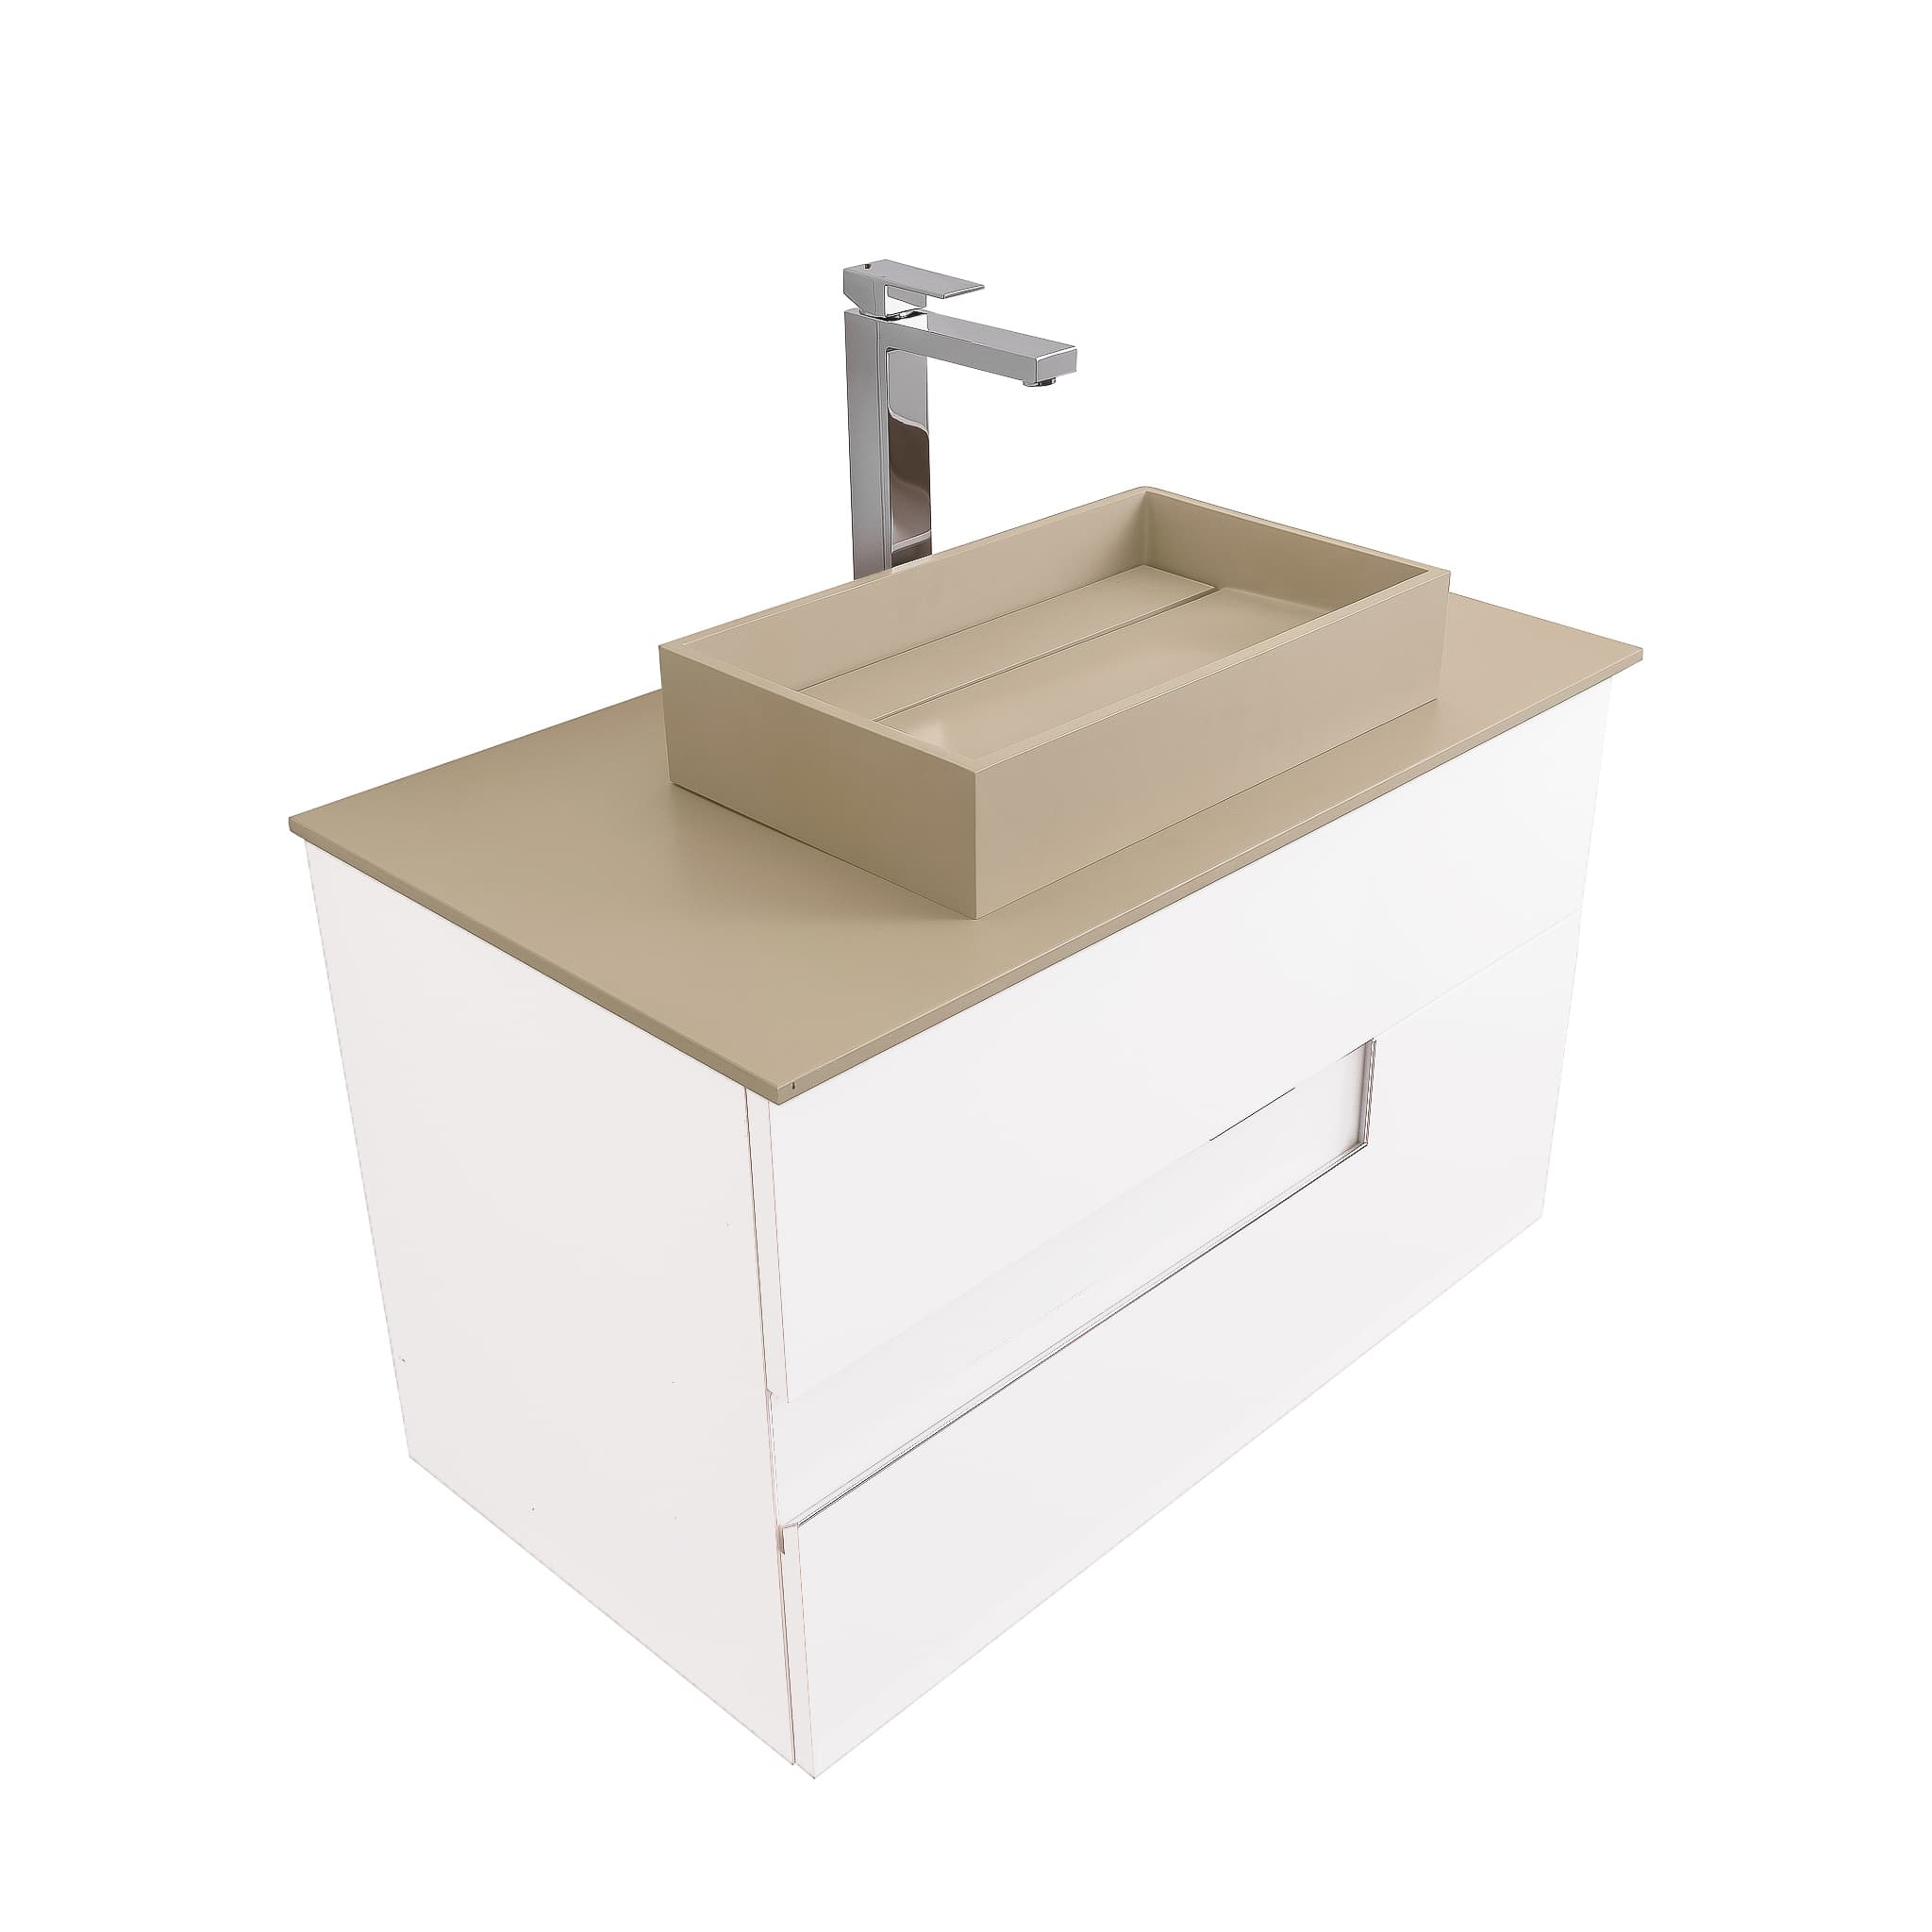 Vision 39.5 White High Gloss Cabinet, Solid Surface Flat Taupe Counter And Infinity Square Solid Surface Taupe Basin 1329, Wall Mounted Modern Vanity Set